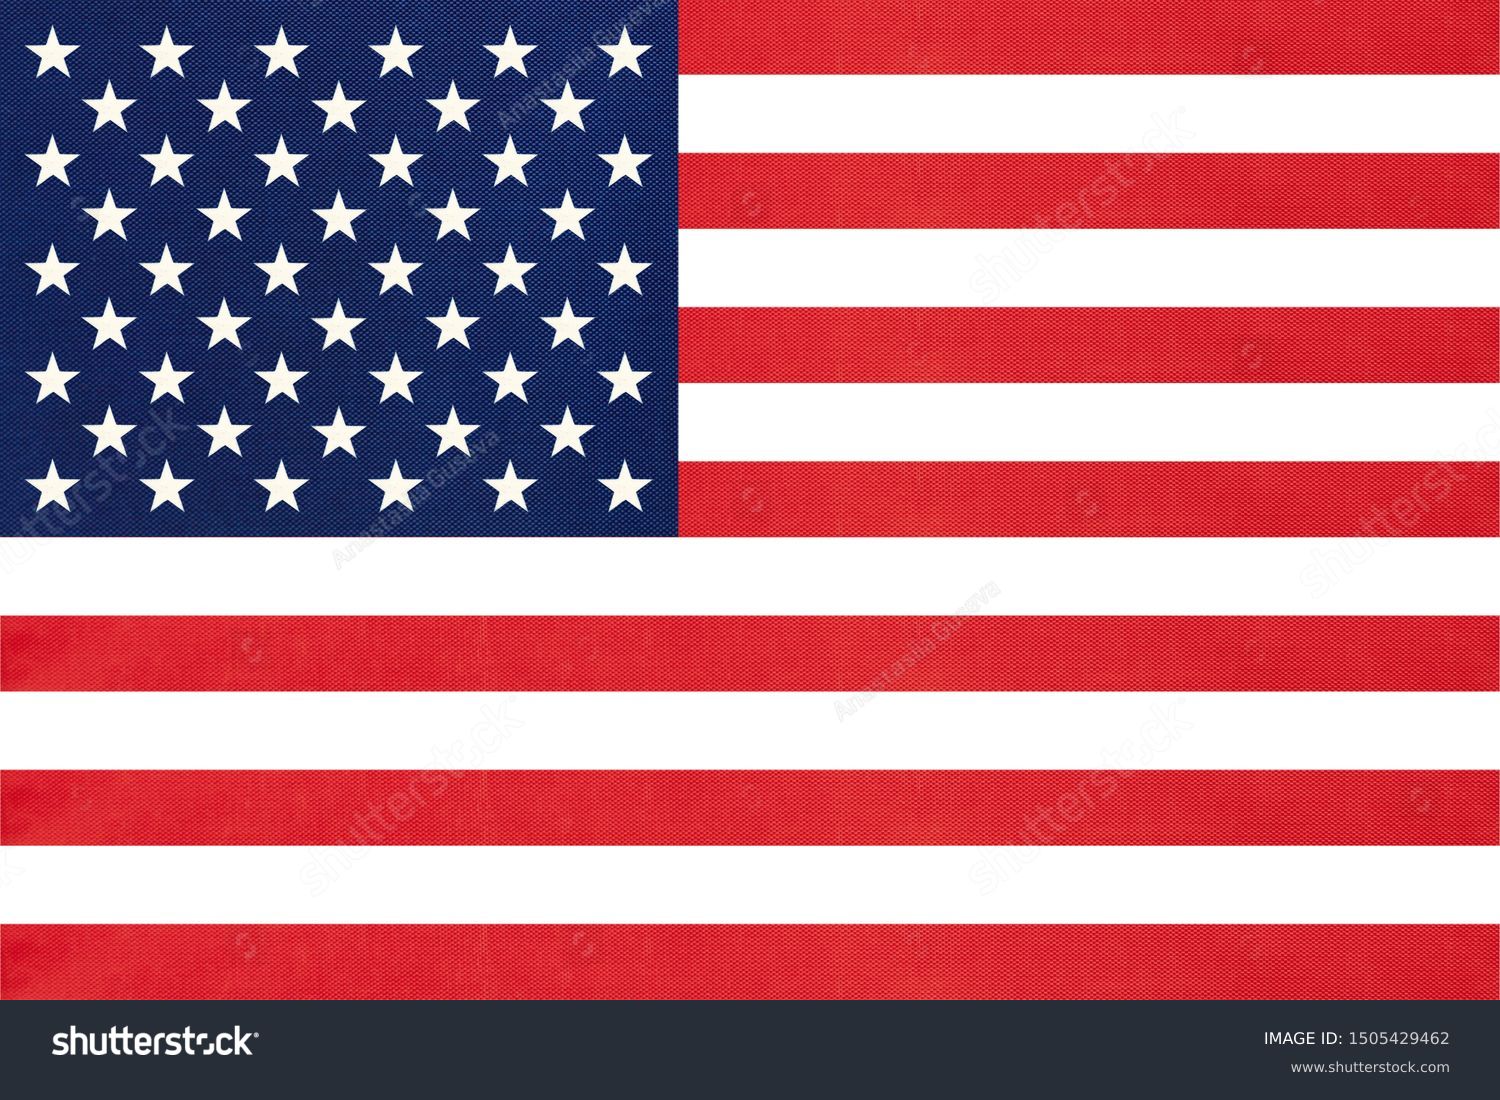 United states of America national fabric flag textile background. Symbol of international world American country. State official USA sign. #1505429462